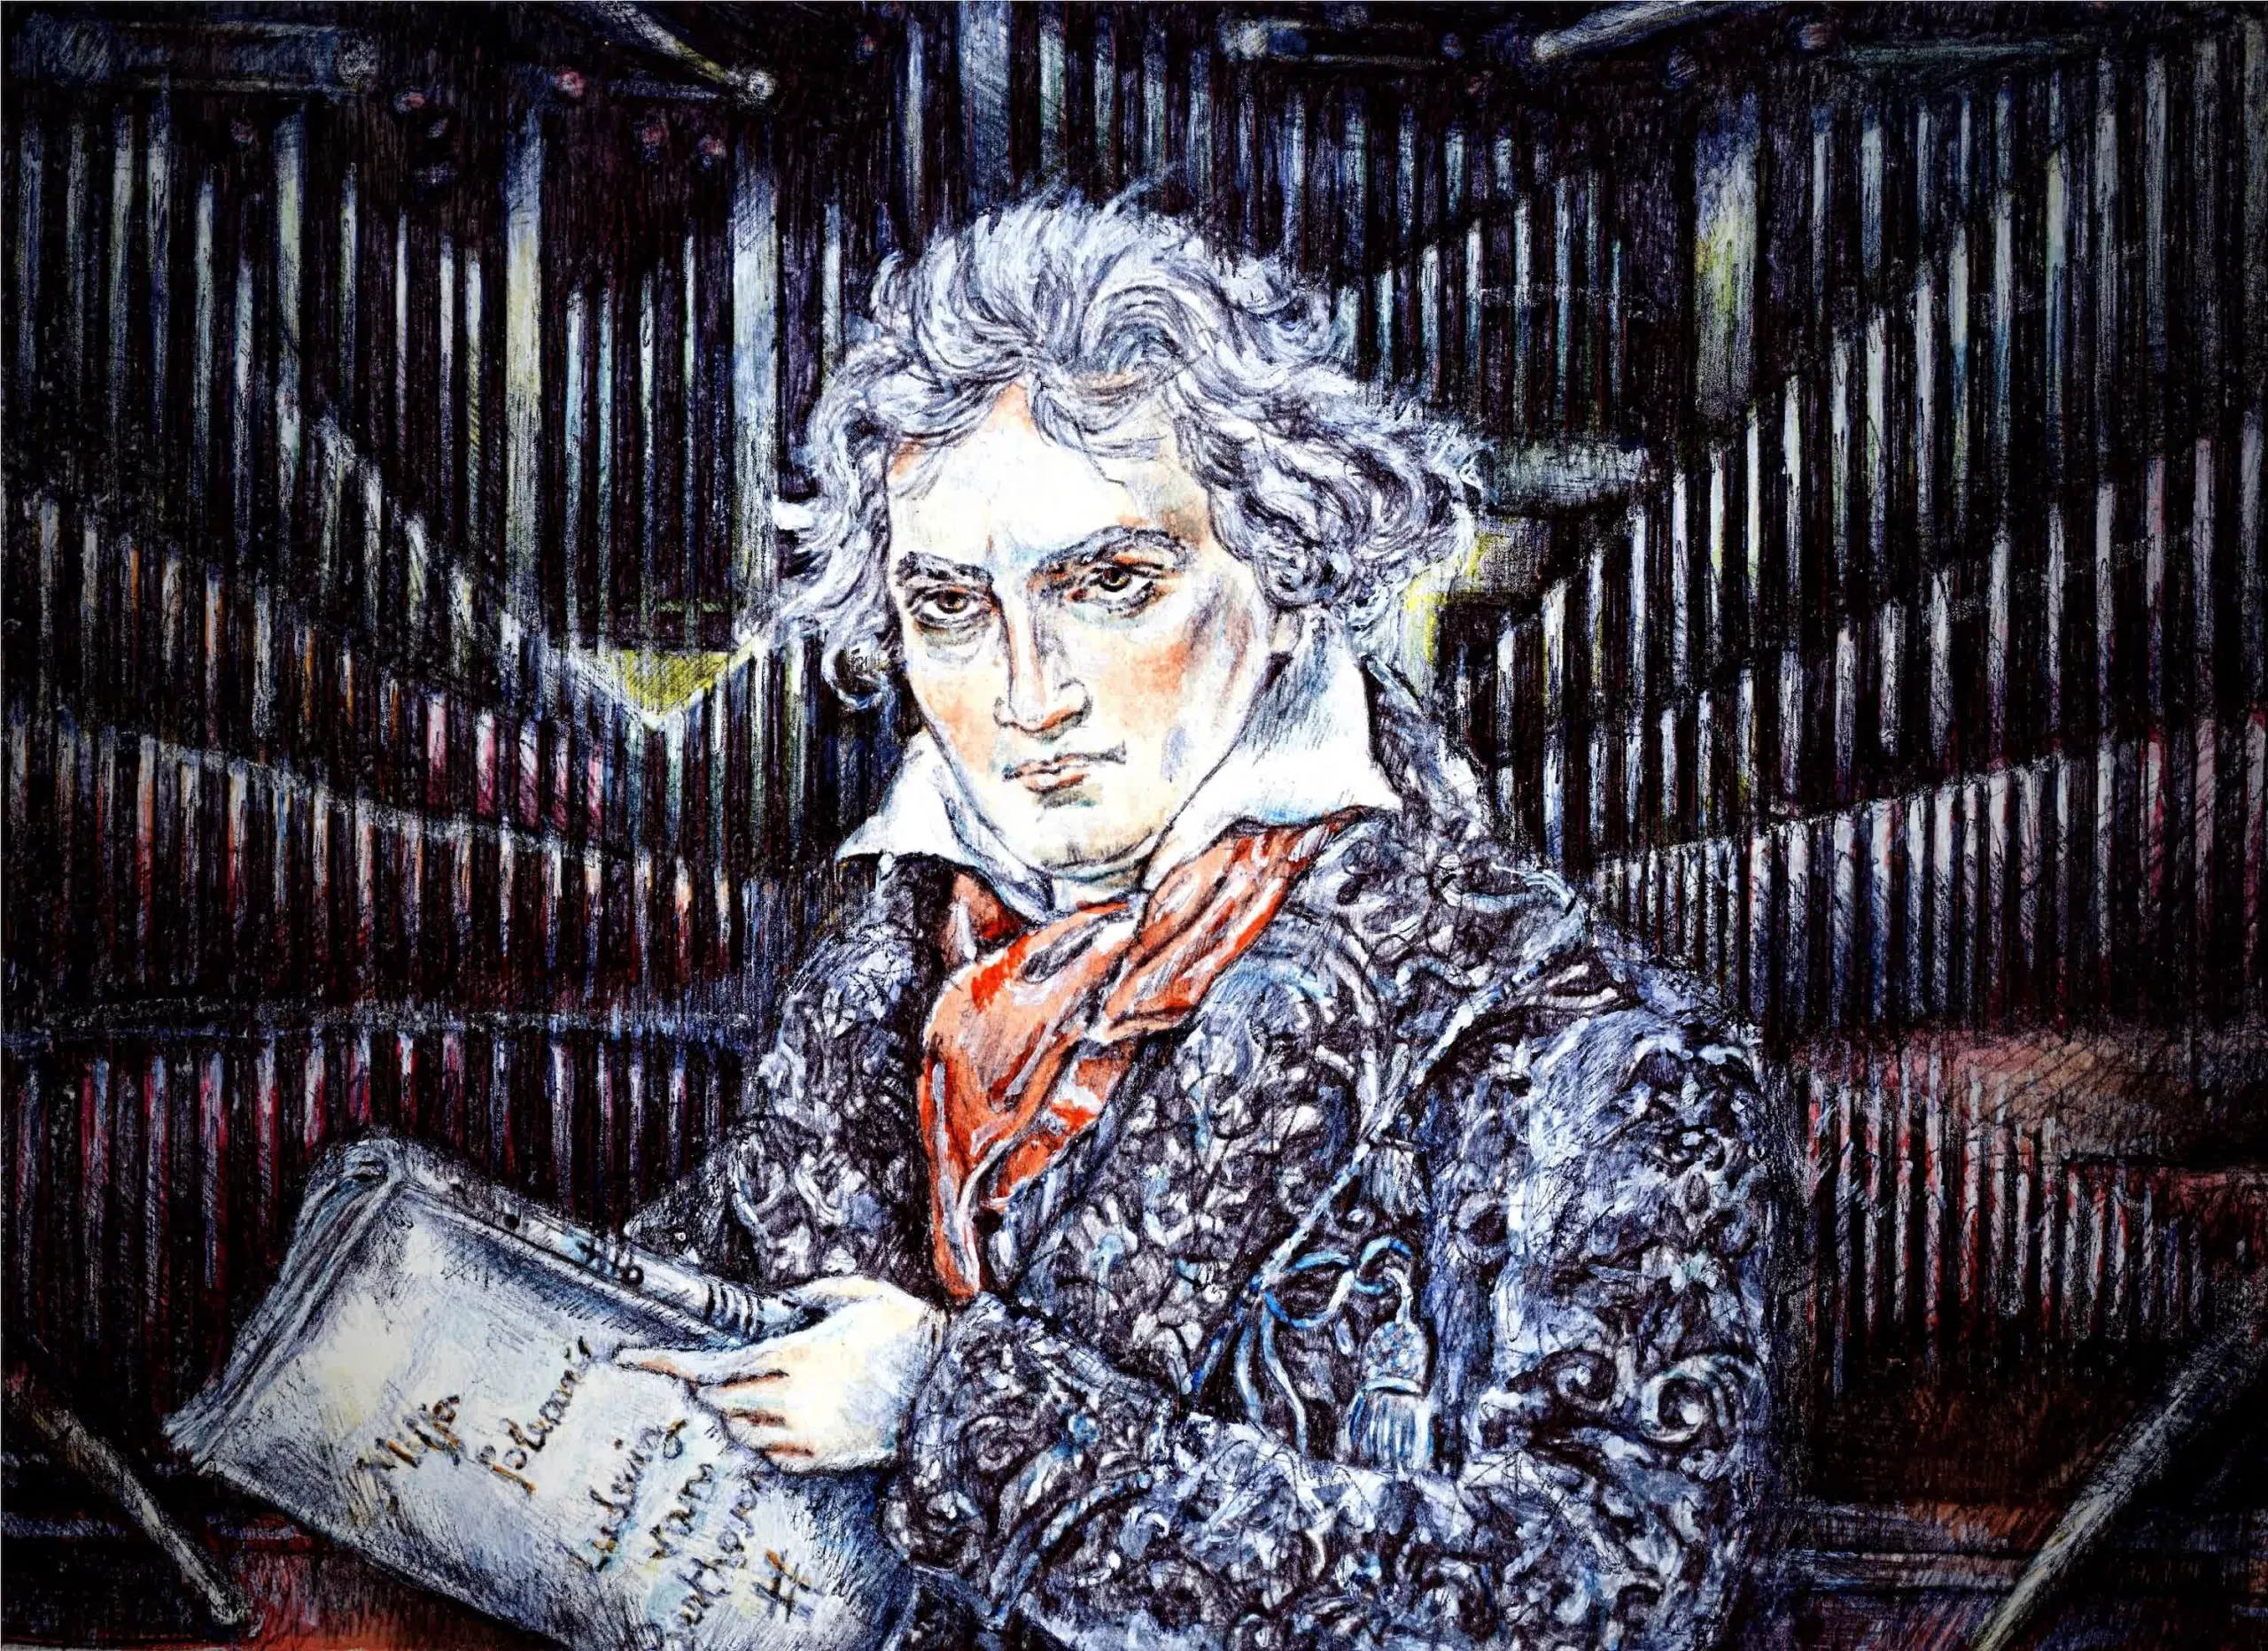 Music scholars and computer scientists completed Beethoven's Tenth Symphony aided by machine learning